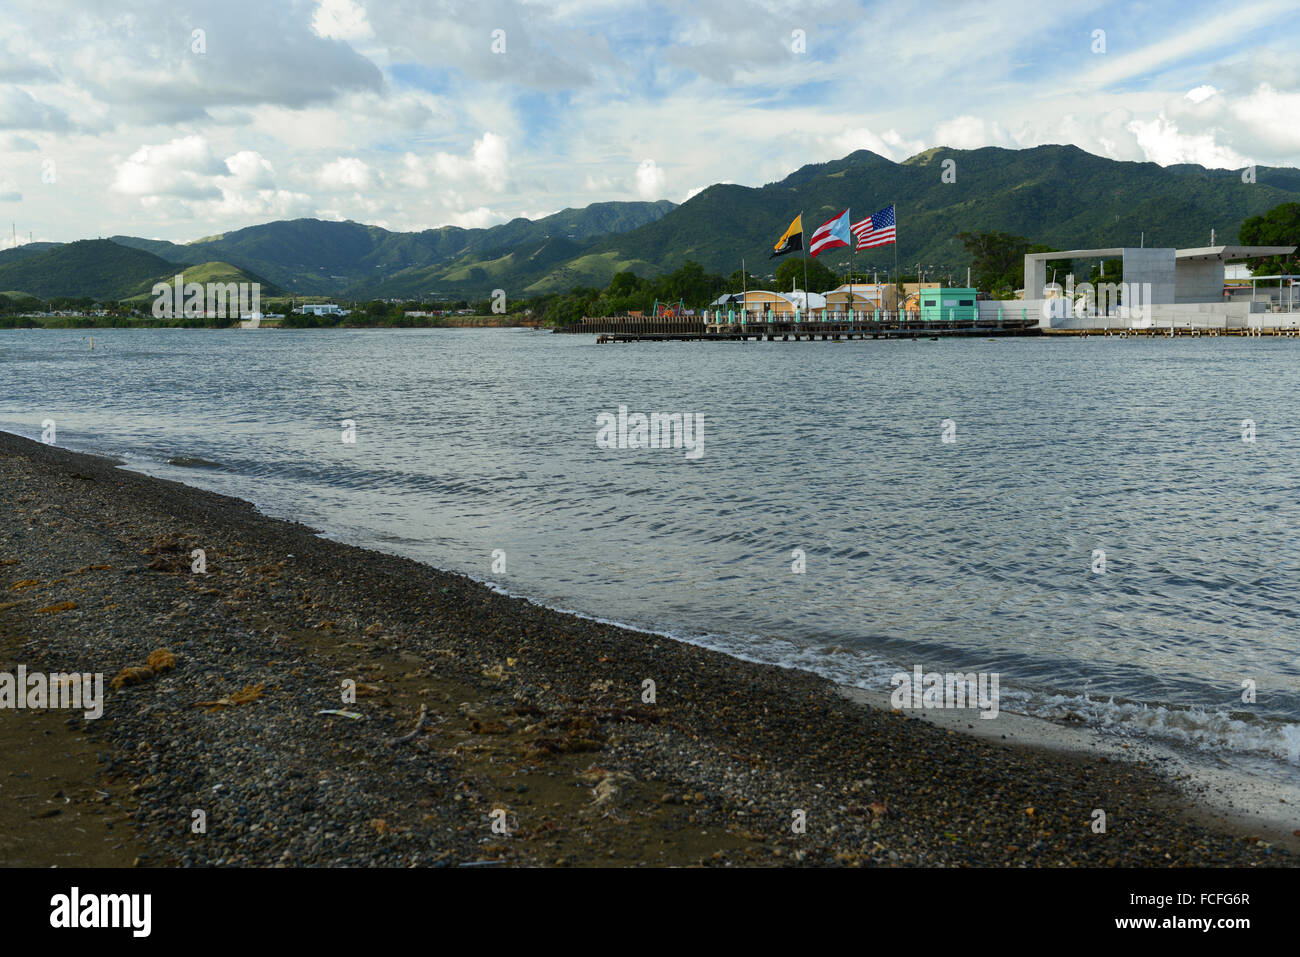 Boardwalk (malecon) of the town of Arroyo, Puerto Rico.View from afar. Caribbean Island. USA territory. Stock Photo